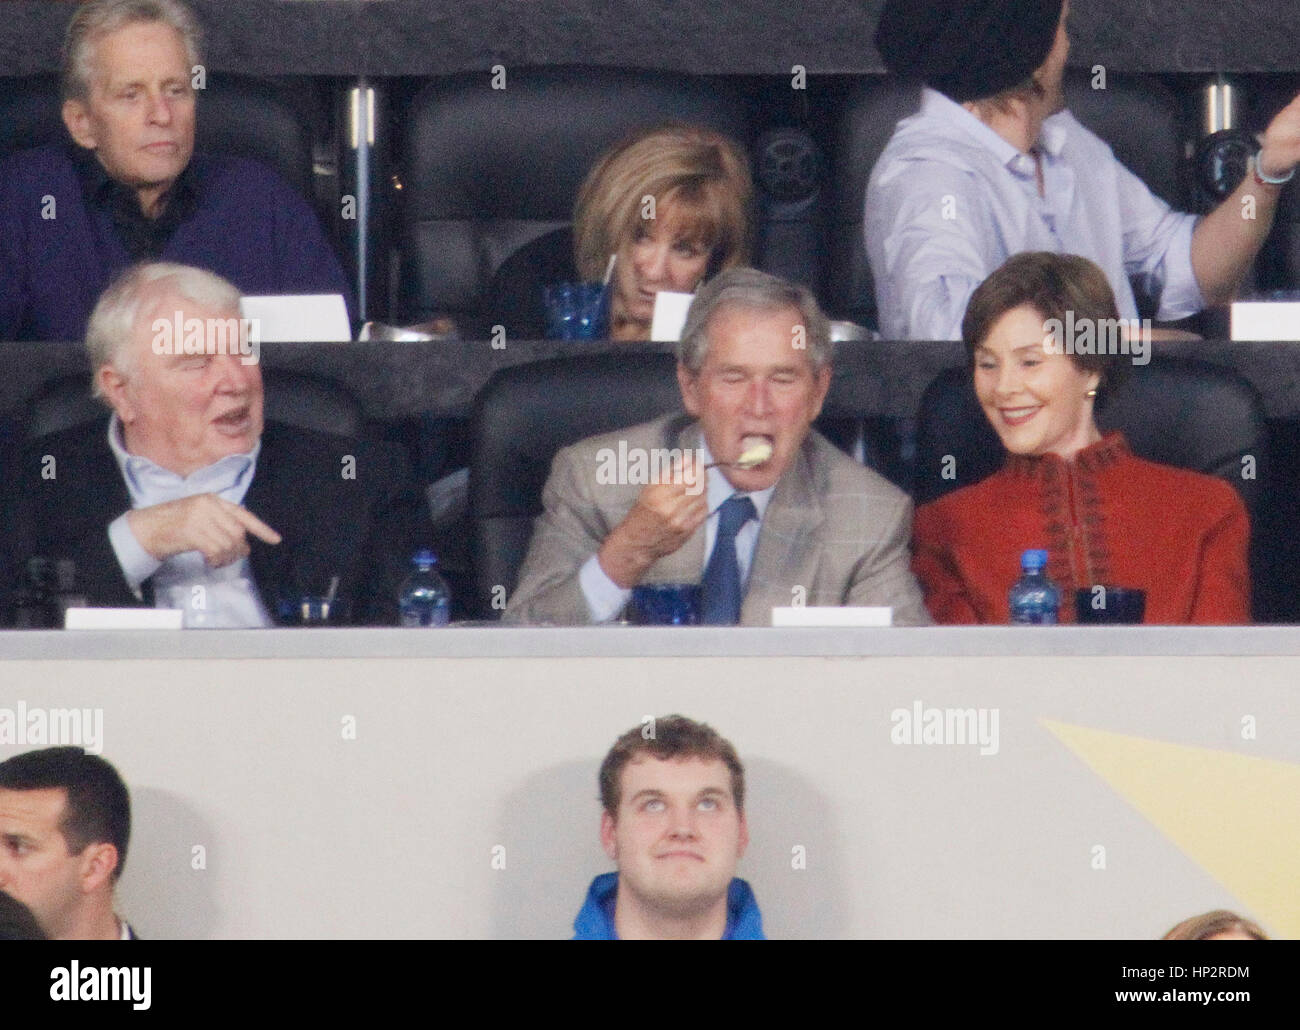 President George W. Bush eats with John Madden, left, his wife, Laura Bush at Super Bowl XLV football game in Arlington, Texas on February 6, 2011. Photo by Francis Specker Stock Photo